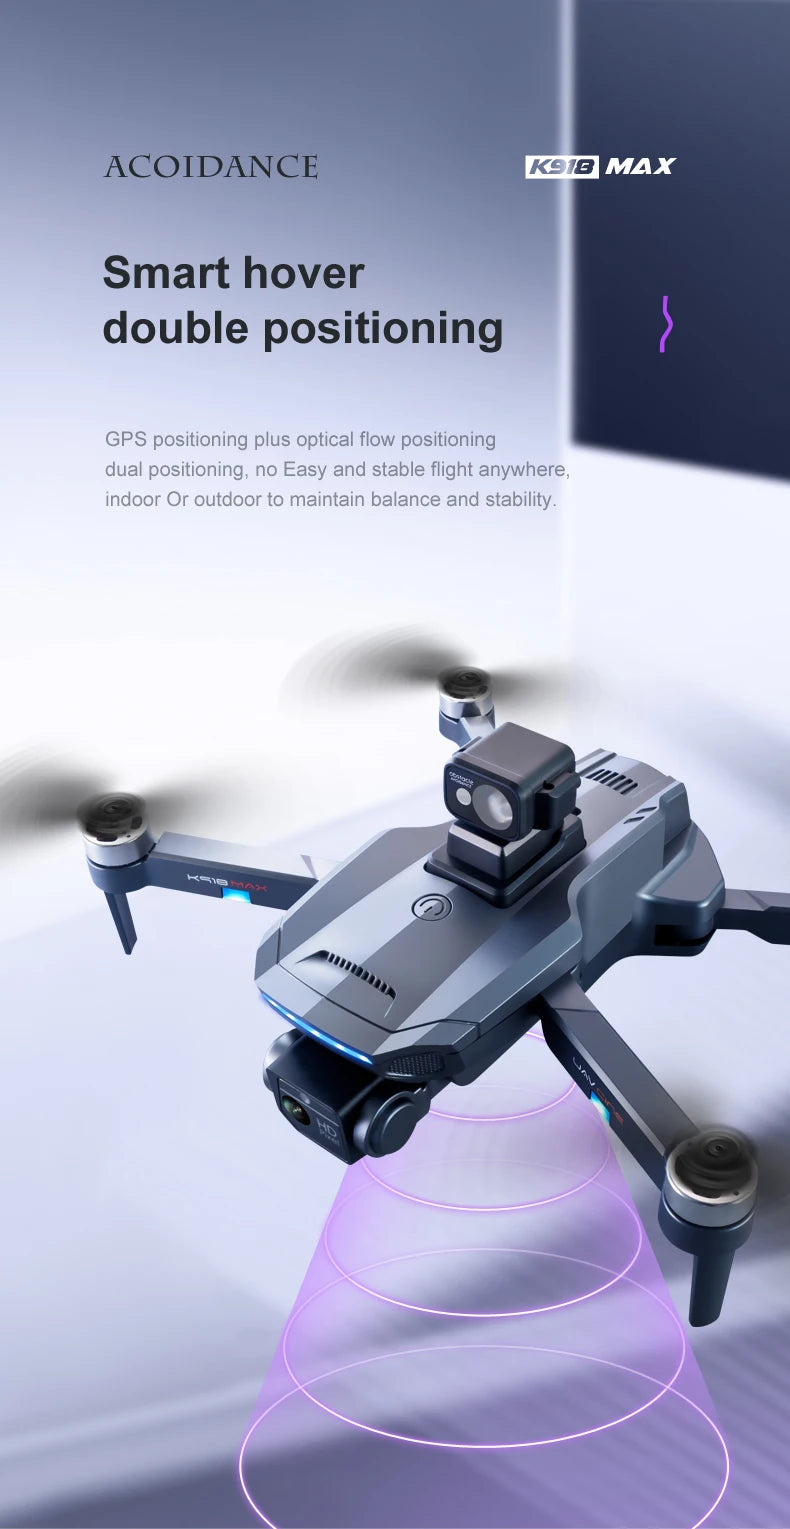 K918 Max, max smart hover double positioning gps positioning plus optical flow positioning